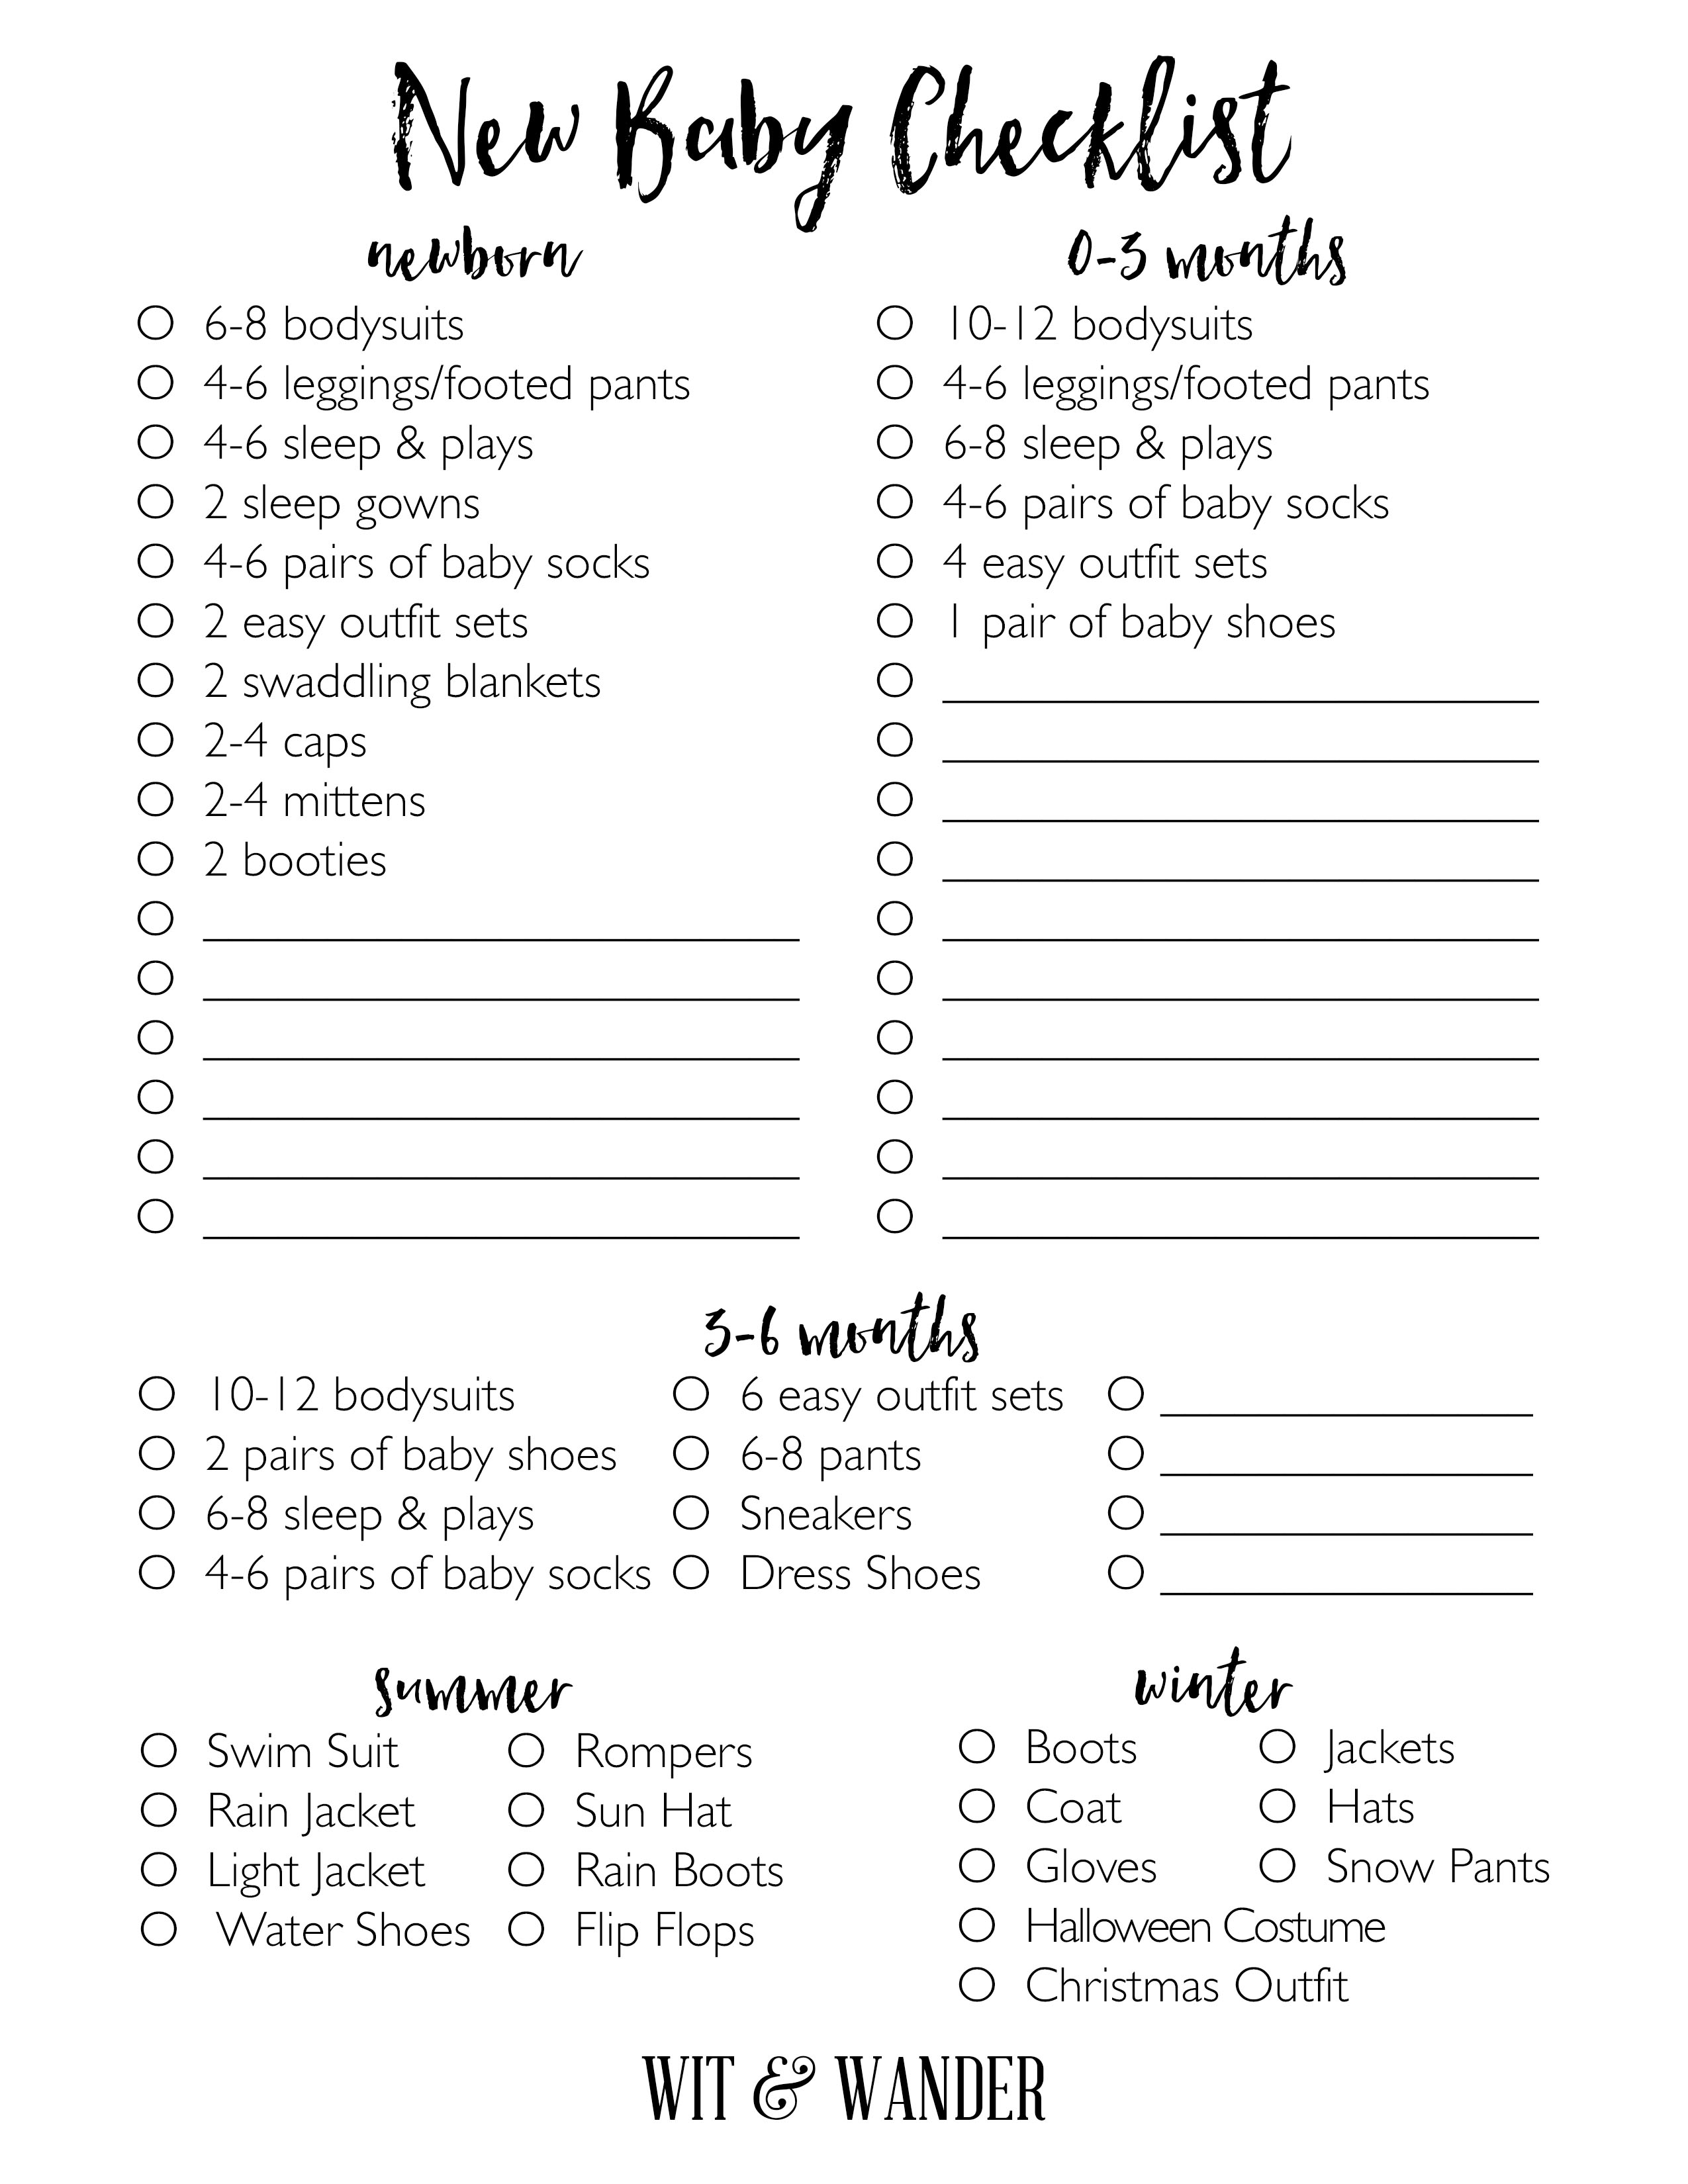 New Baby Checklist - Prepping for Baby - Our Handcrafted Life